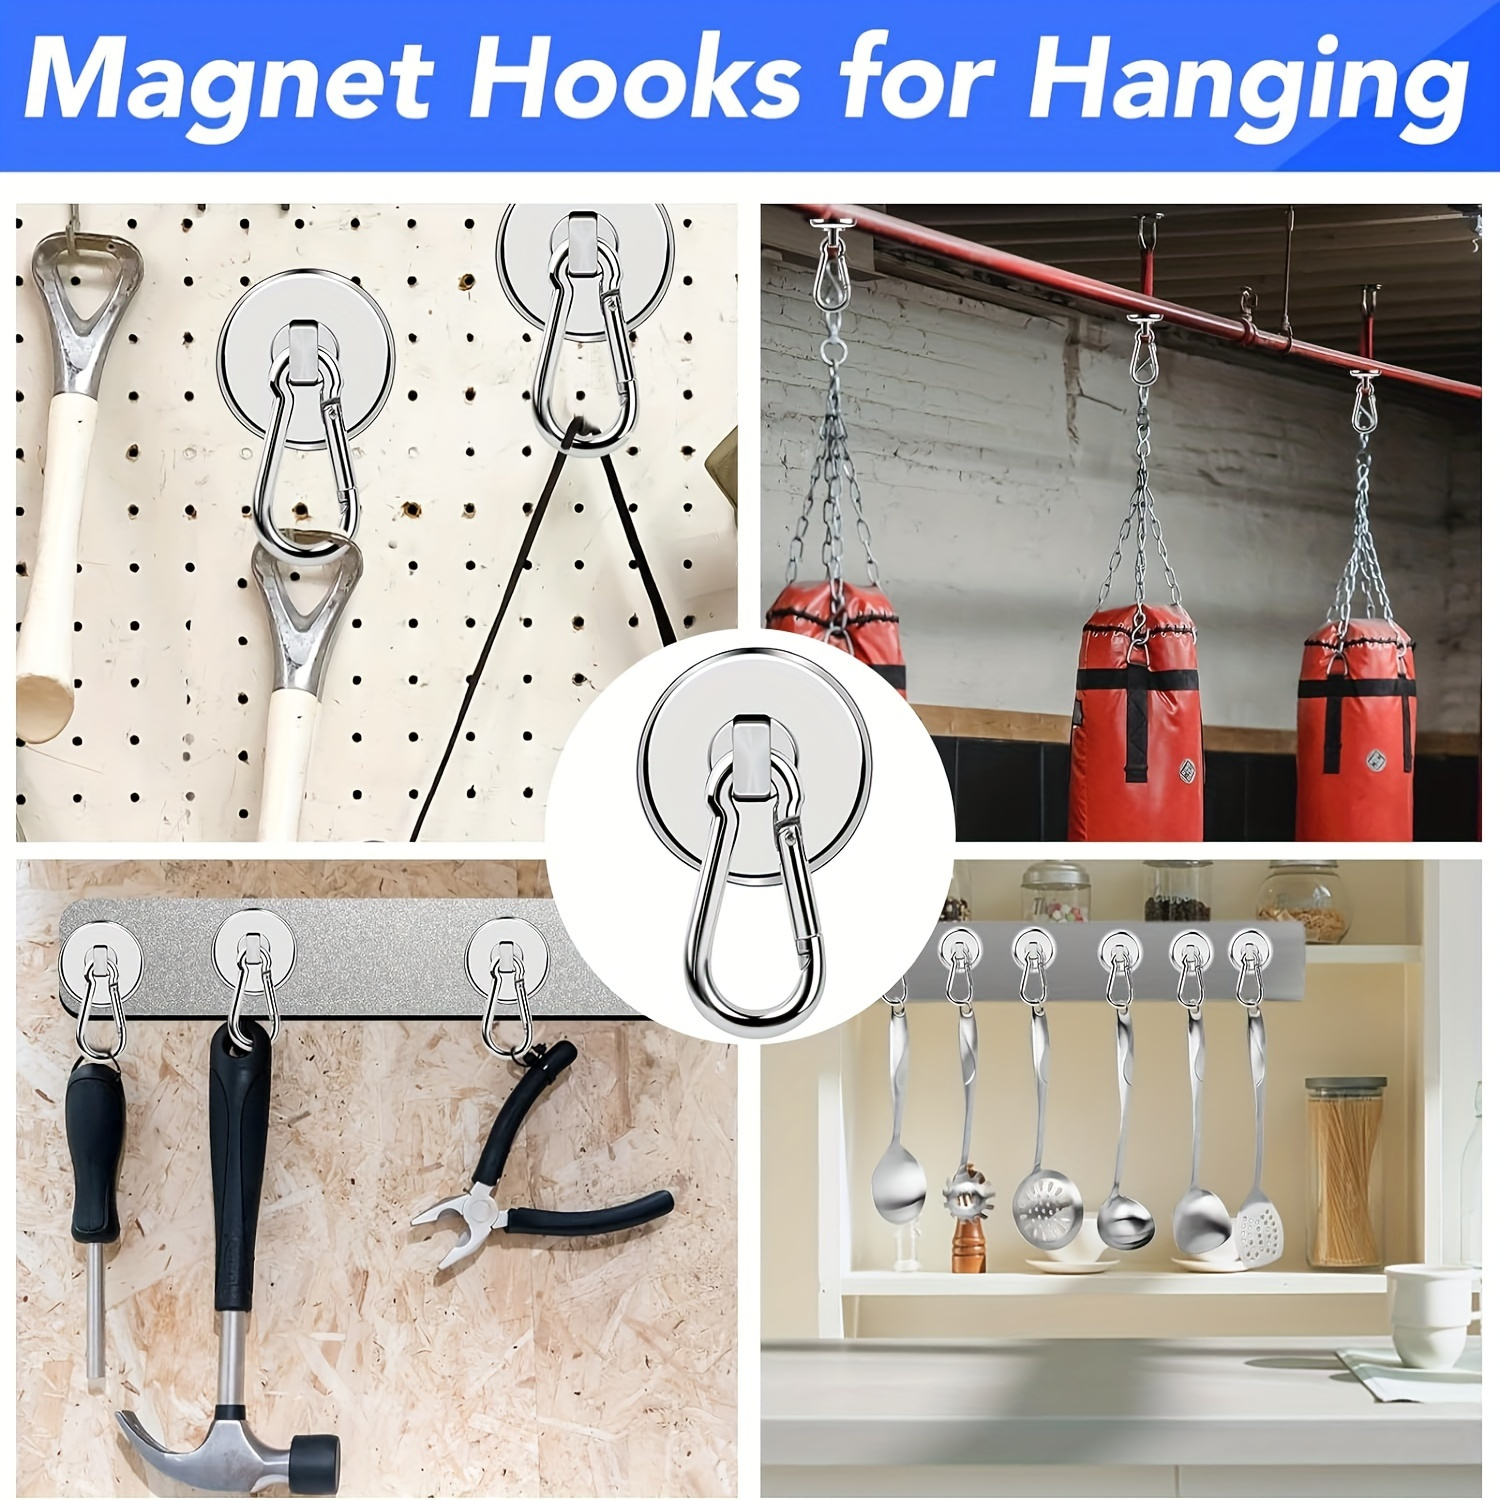 

4pcs Magnetic Hooks Heavy Duty, Strong Magnetic Hooks Neodymium Magnets With Carabiner, Magnet Hooks With Swivel For Bbq, Hanging, Cruise, Kitchen, Garage, Refrigerator